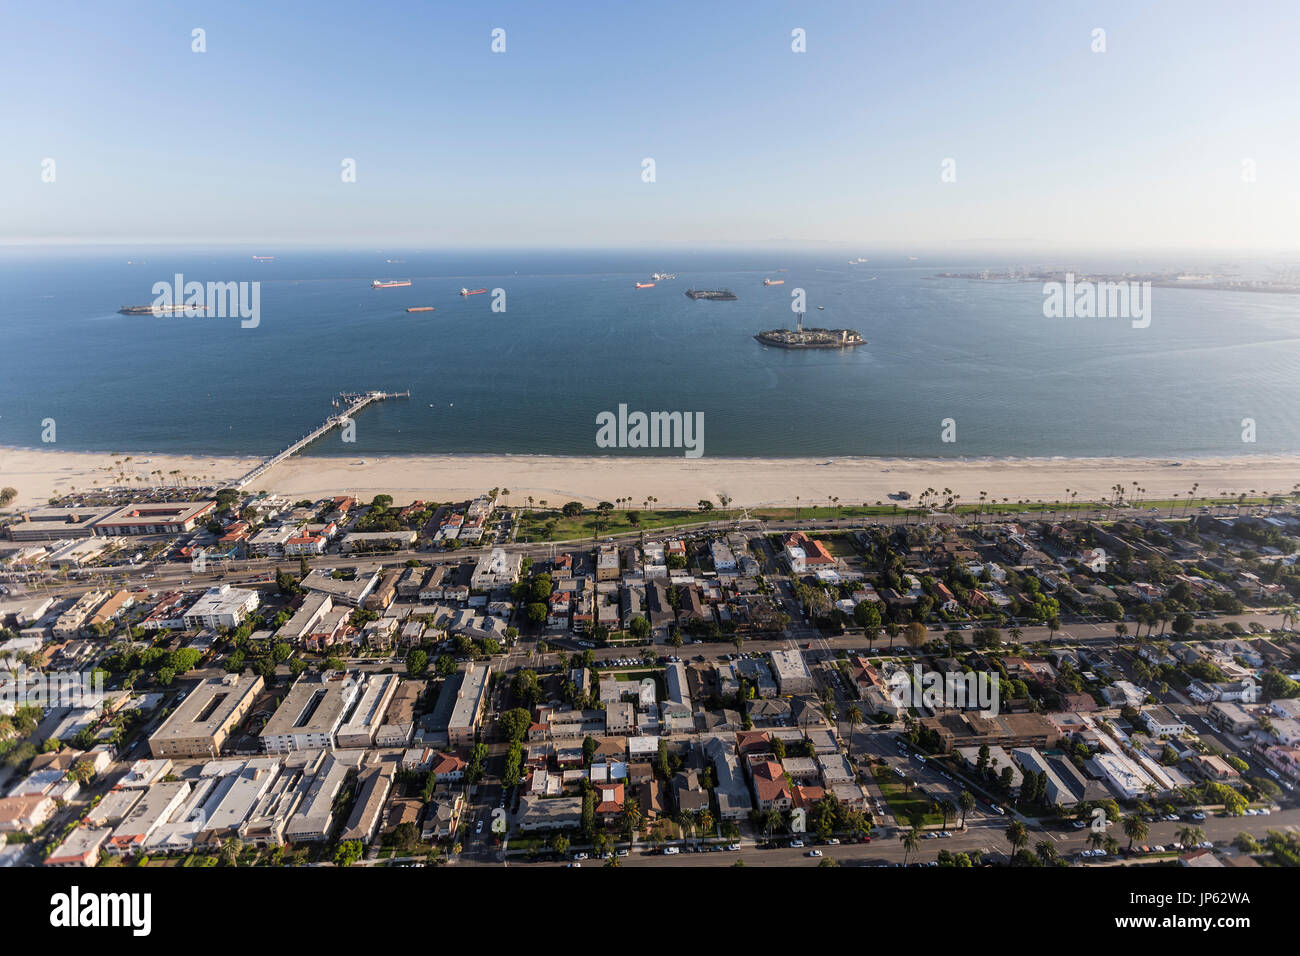 Aerial view of the Bluff Park and Belmont Shore neighborhoods in Long Beach, California. Stock Photo